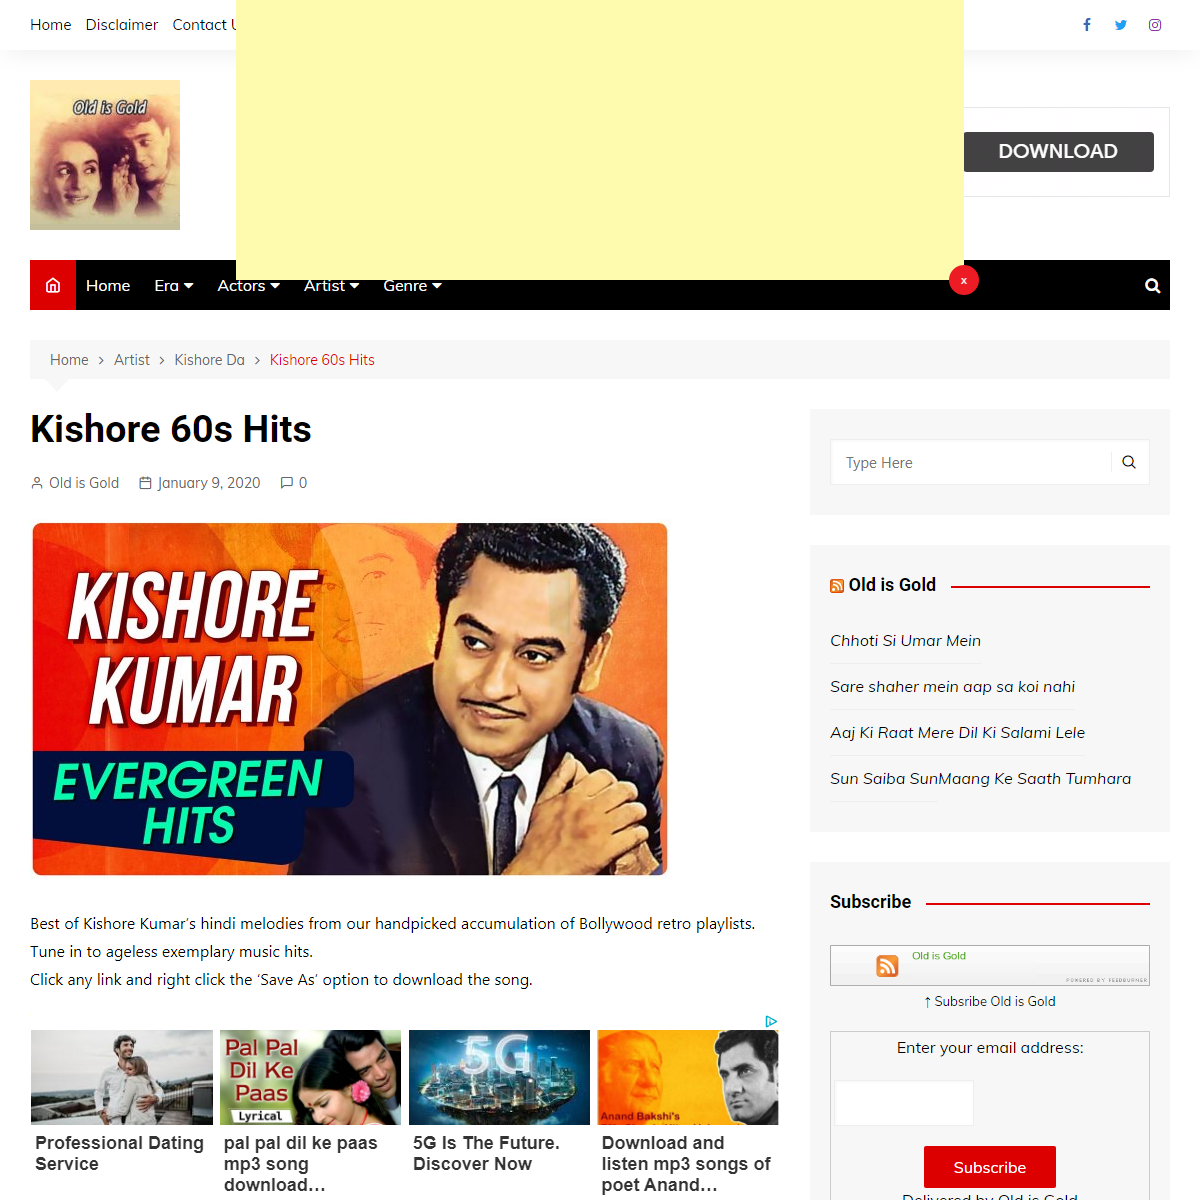 A complete backup of https://www.oldisgold.co.in/kishore-60s-hits/